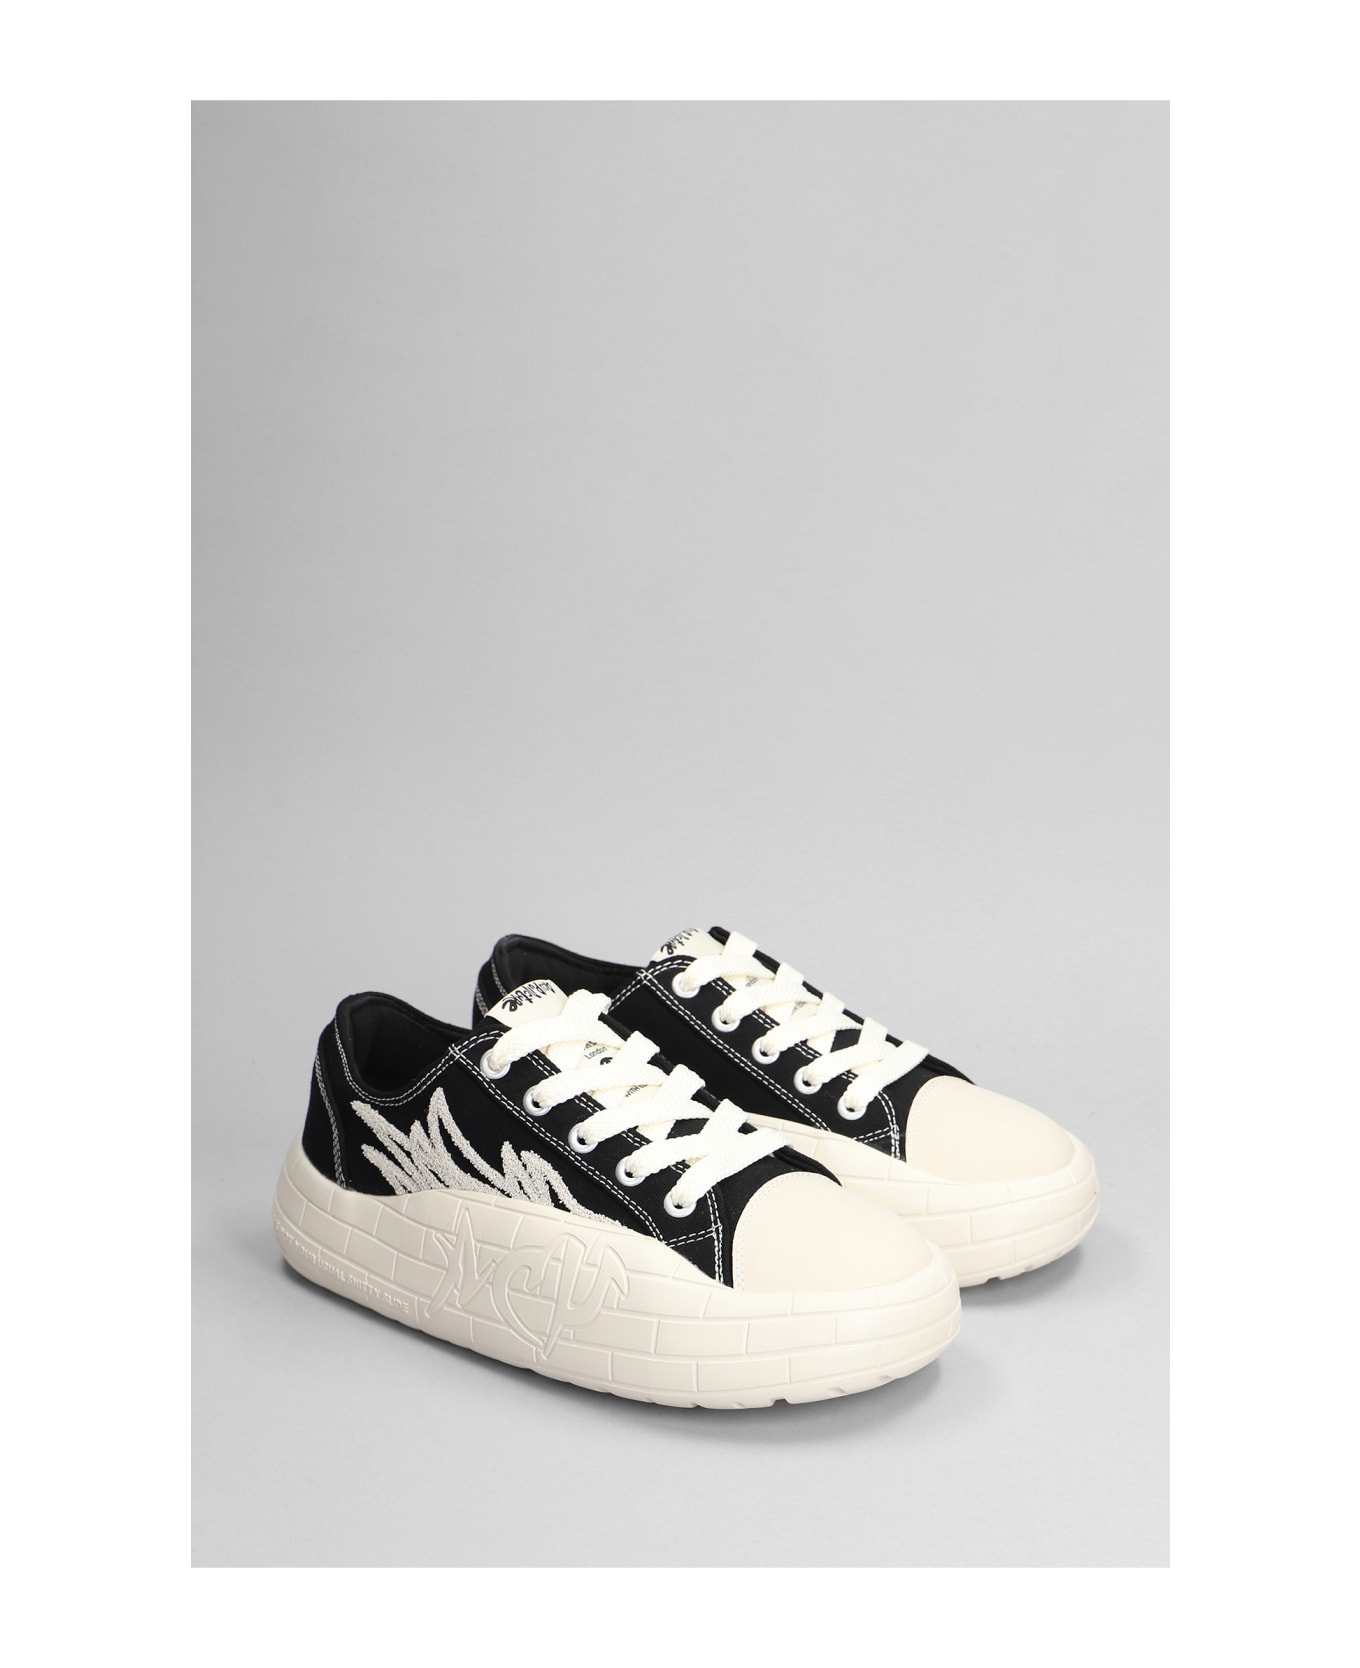 Acupuncture Nyu Vulc G2 Sneakers In Black Canvas - black